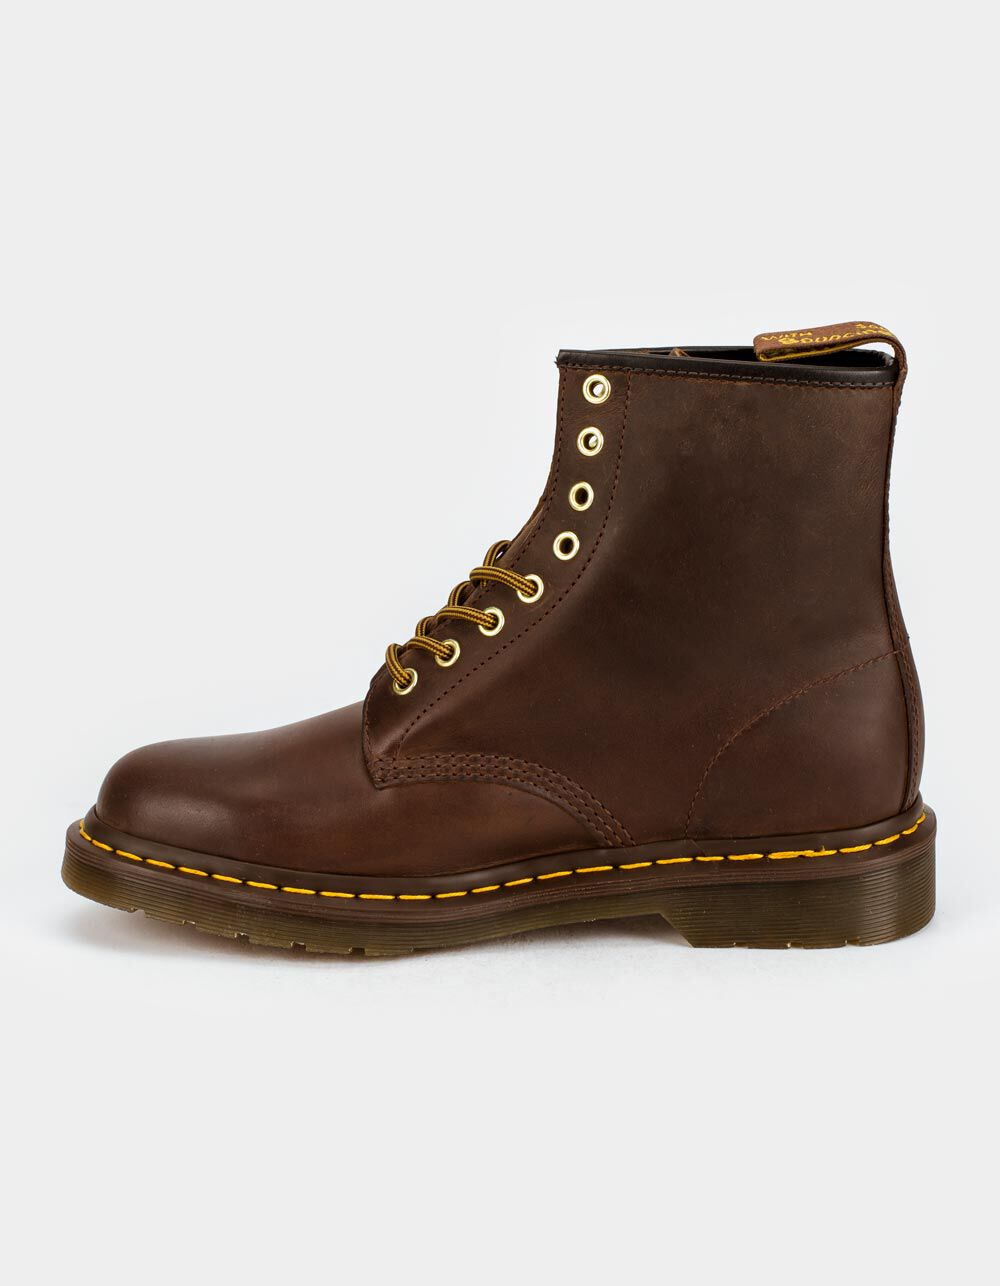 DR MARTENS 1460 Crazy Horse Leather Lace Up Mens Boots